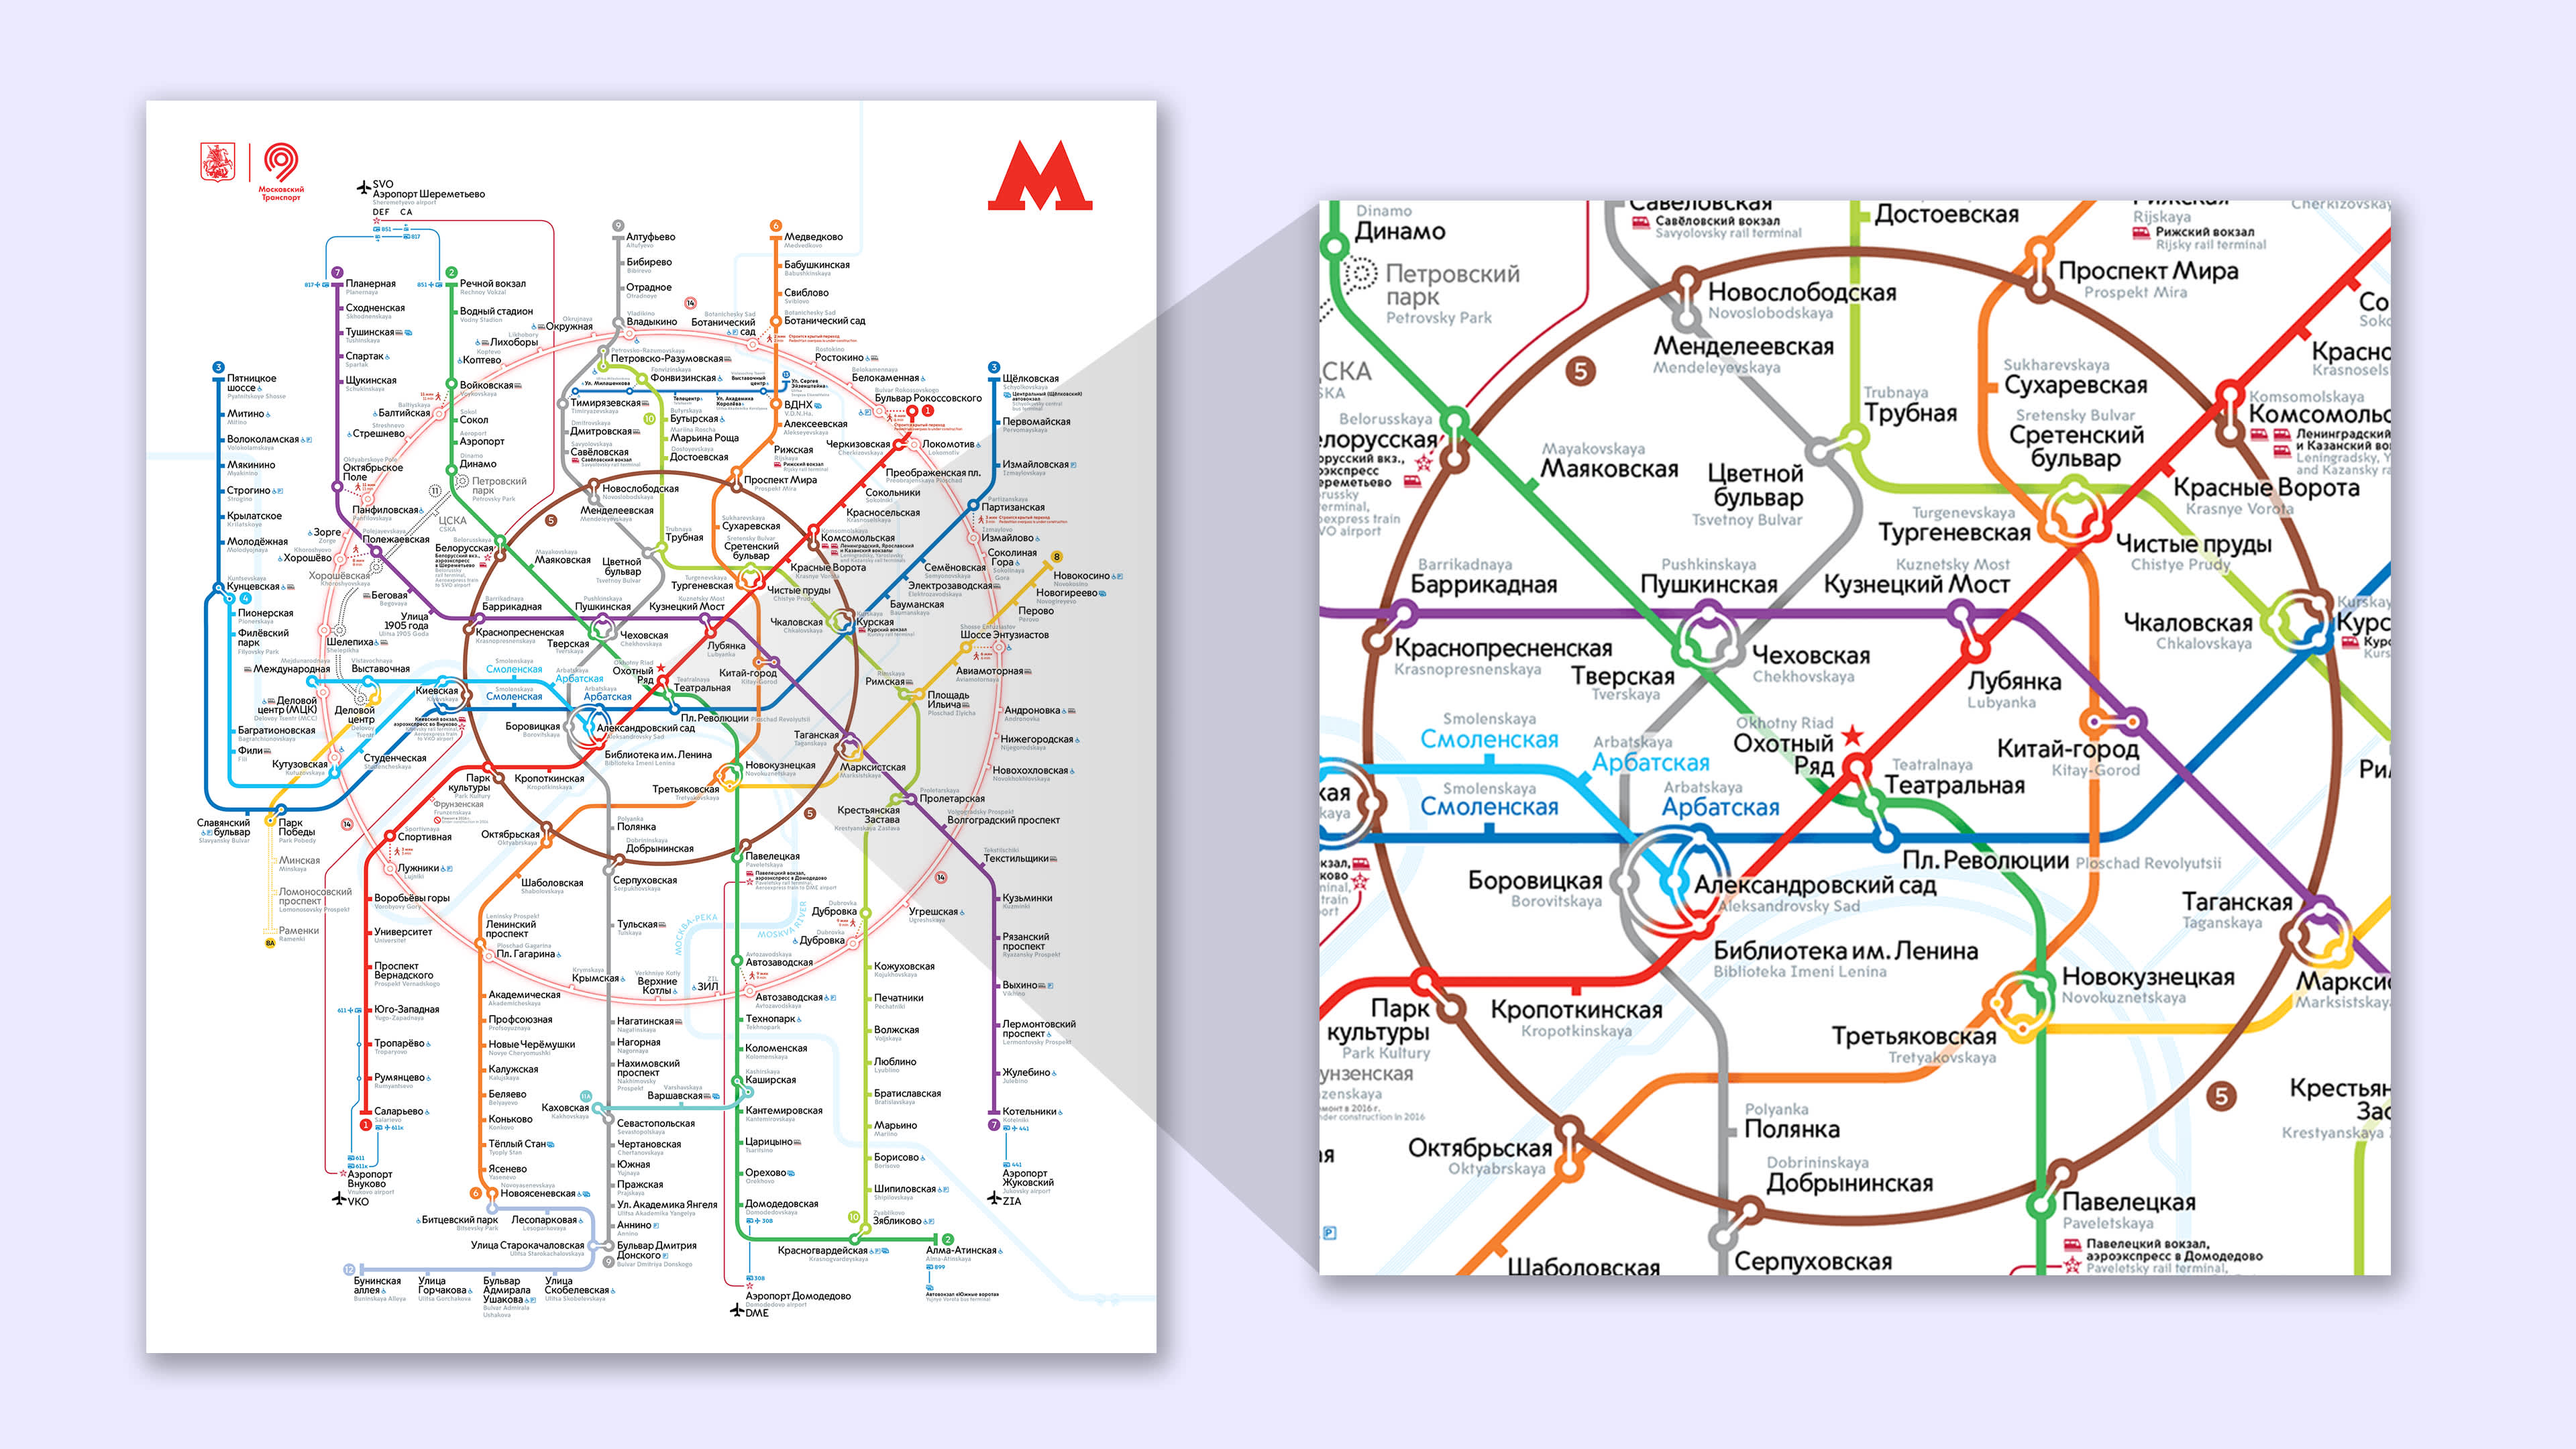 A map of the Moscow Metro system created by Art. Lebedev Studio for a contest in 2013. 